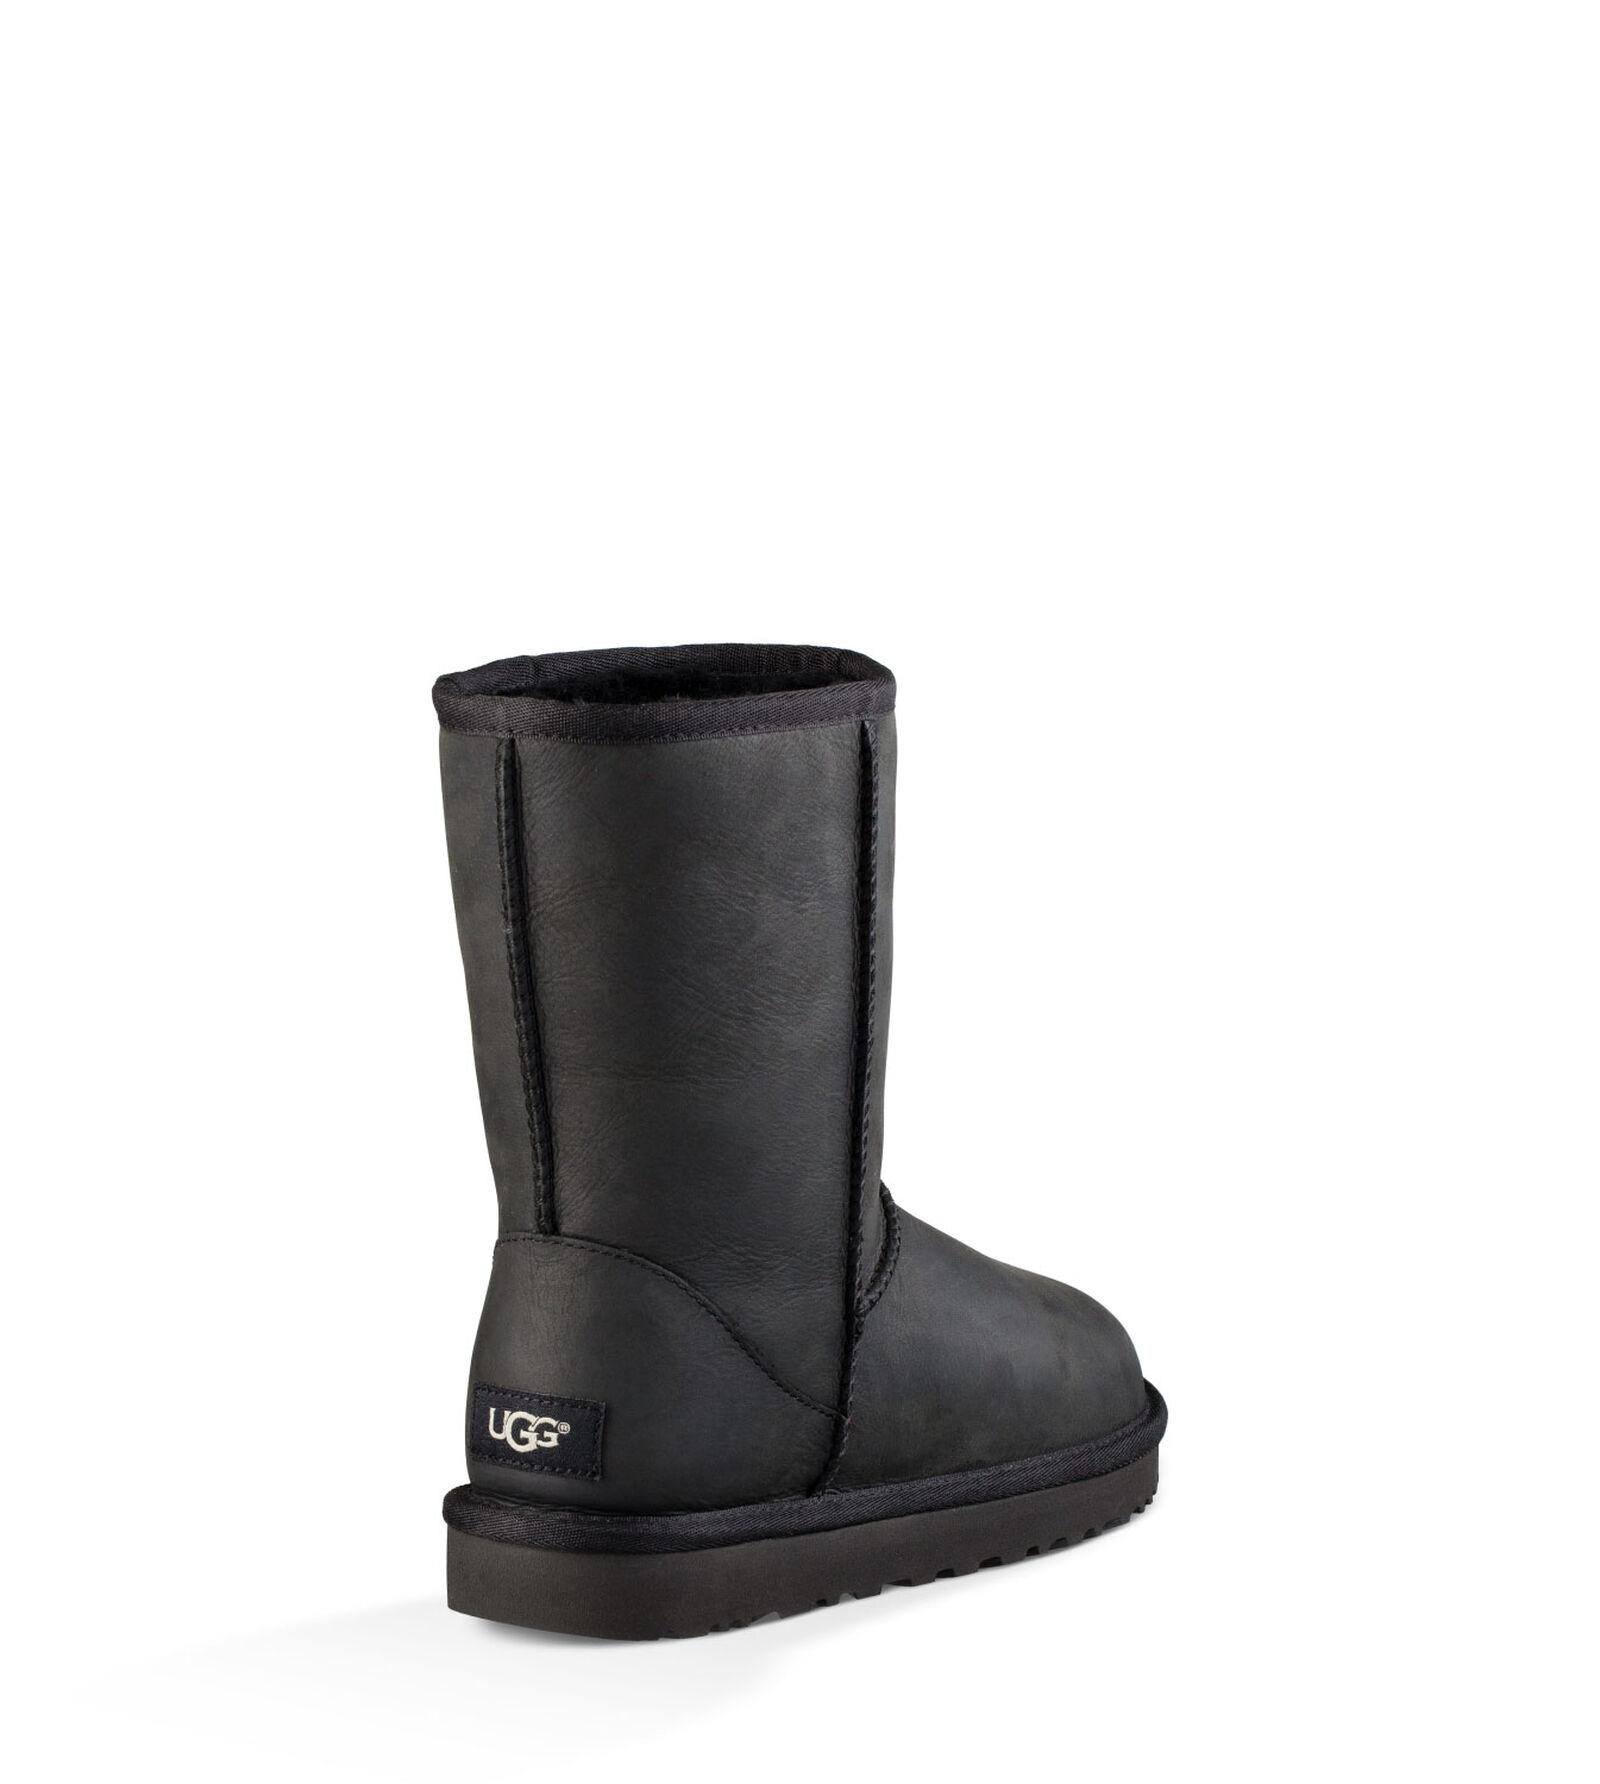 UGG Classic Short Leather Classic Short Leather in Black - Save 26% - Lyst